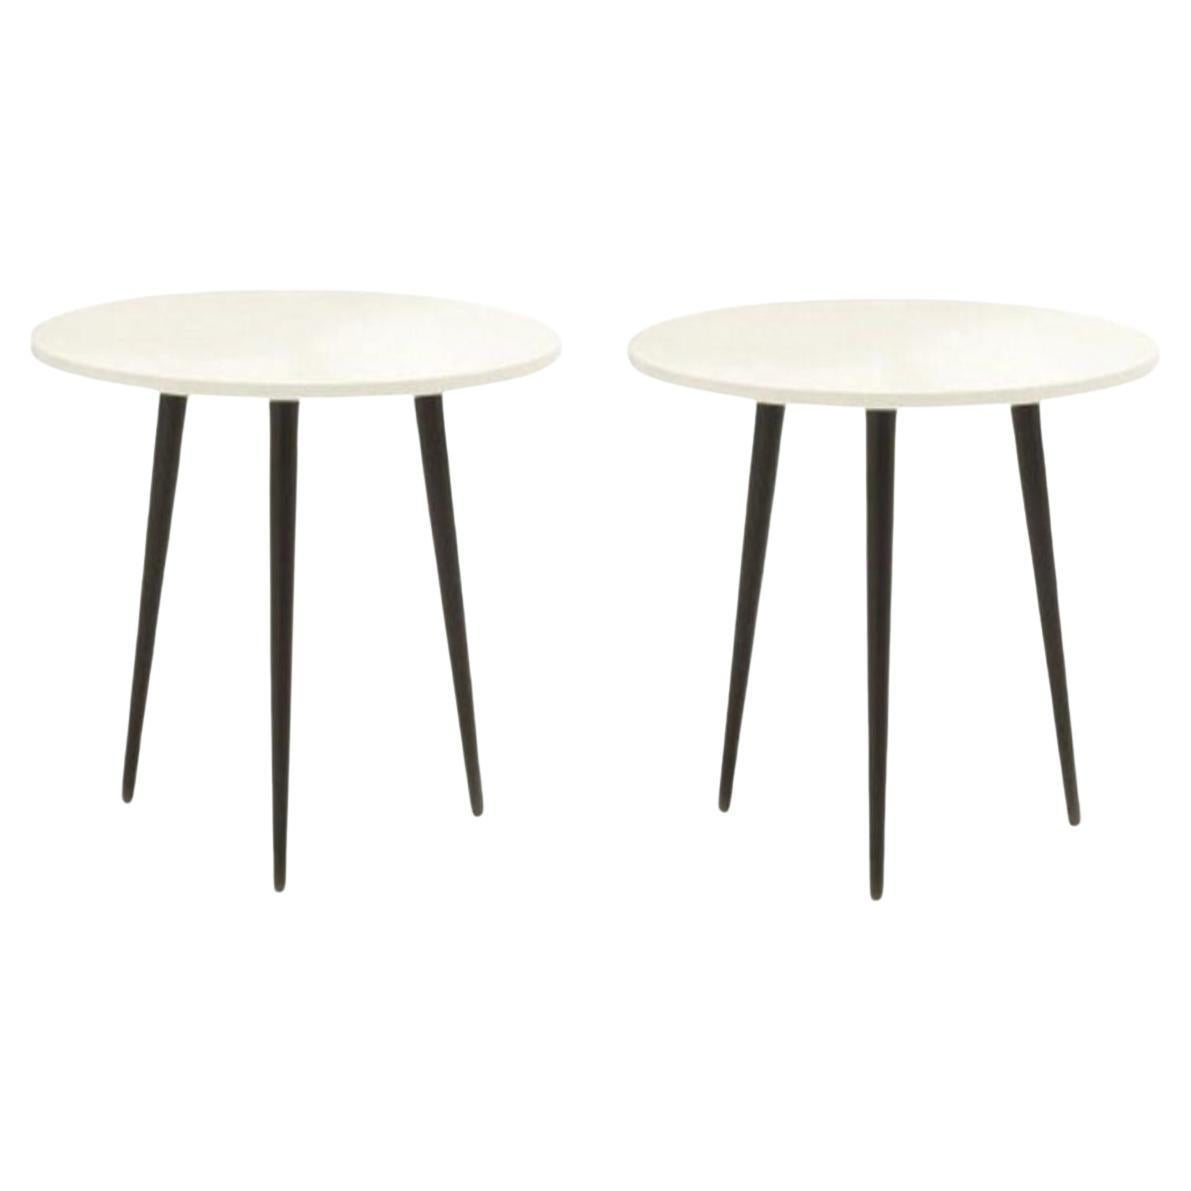 Set of 2 Small Round Soho Side Tables by Coedition Studio